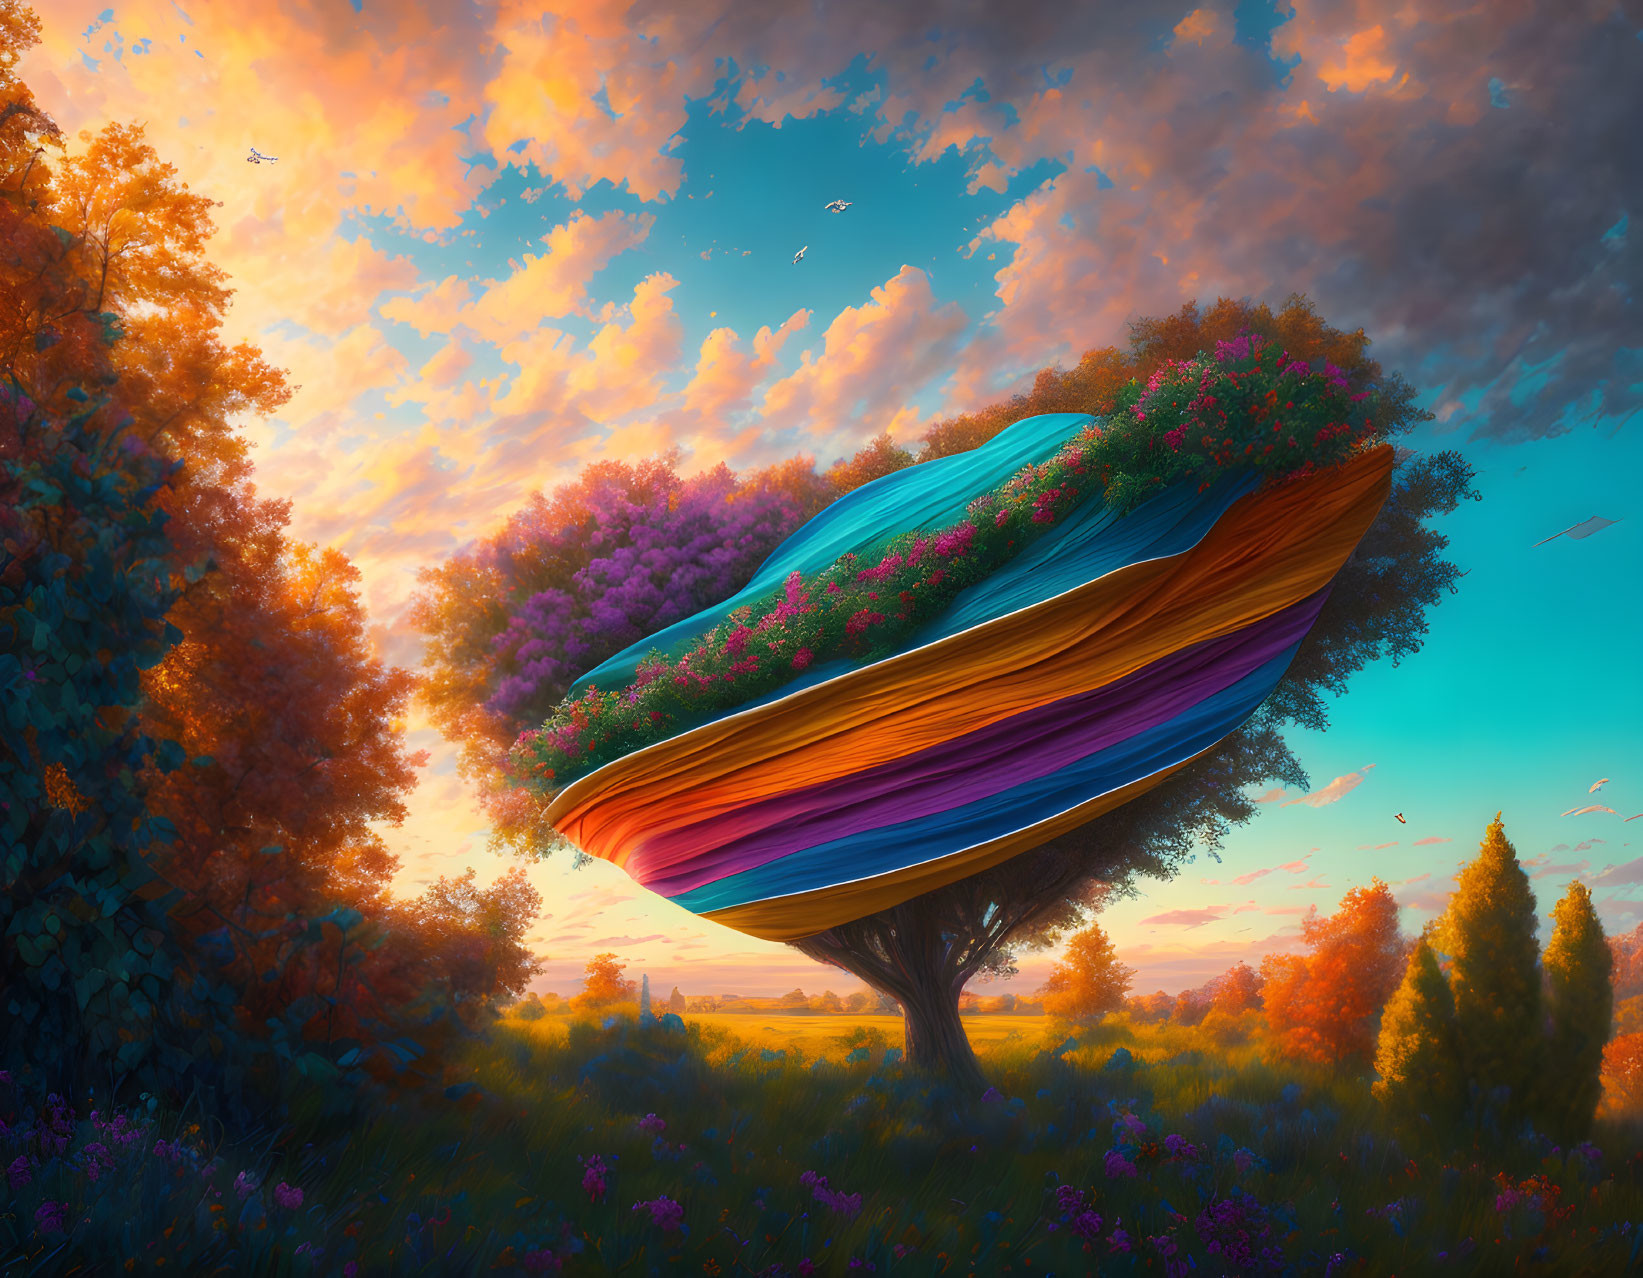 Colorful Tree Structure Illustration Against Sunset Sky